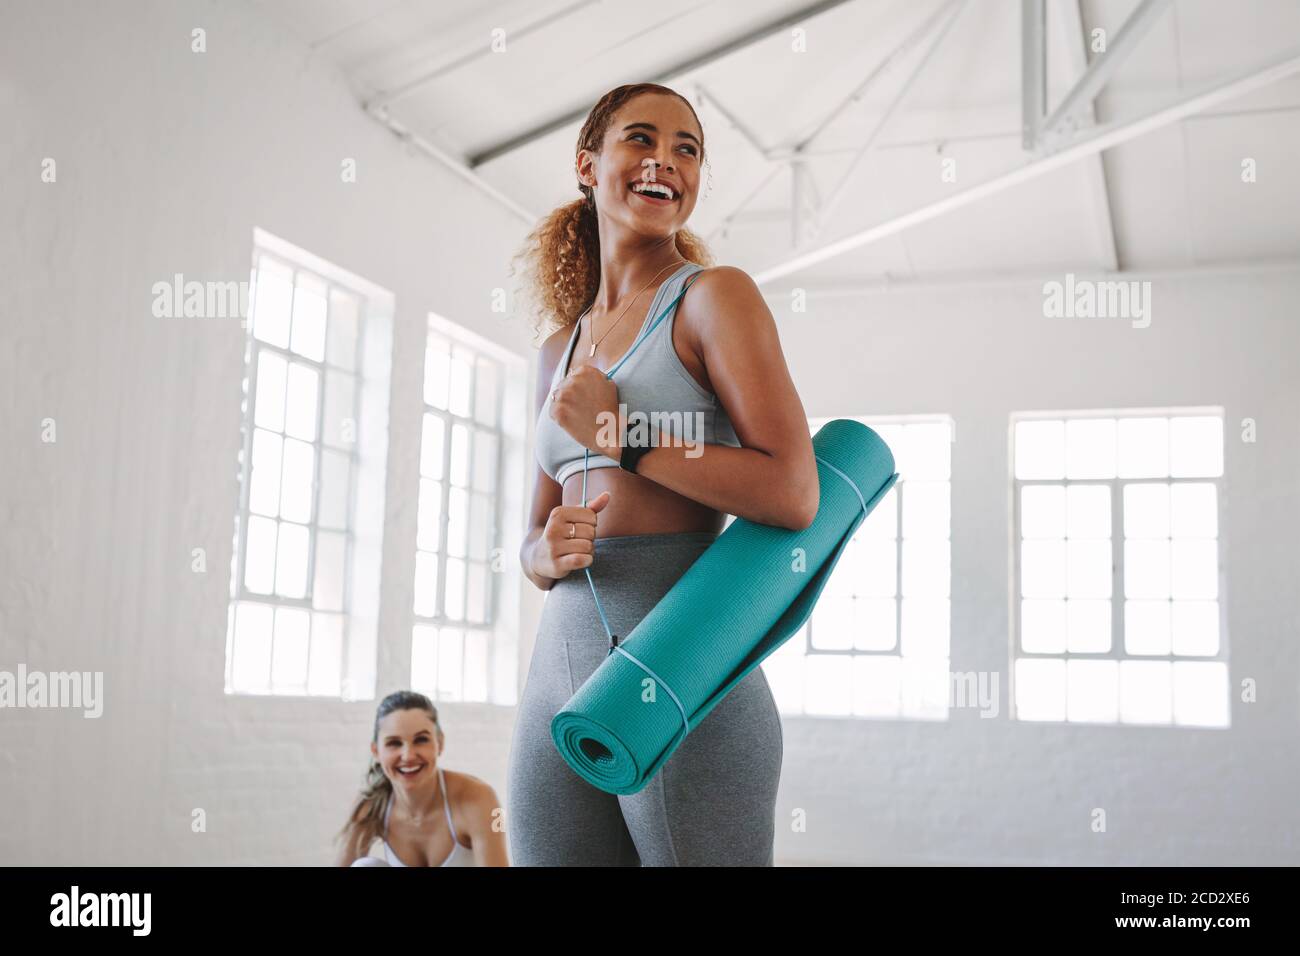 Smiling fitness woman standing in a fitness studio carrying a yoga mat. Portrait of a young woman at a fitness training centre. Stock Photo